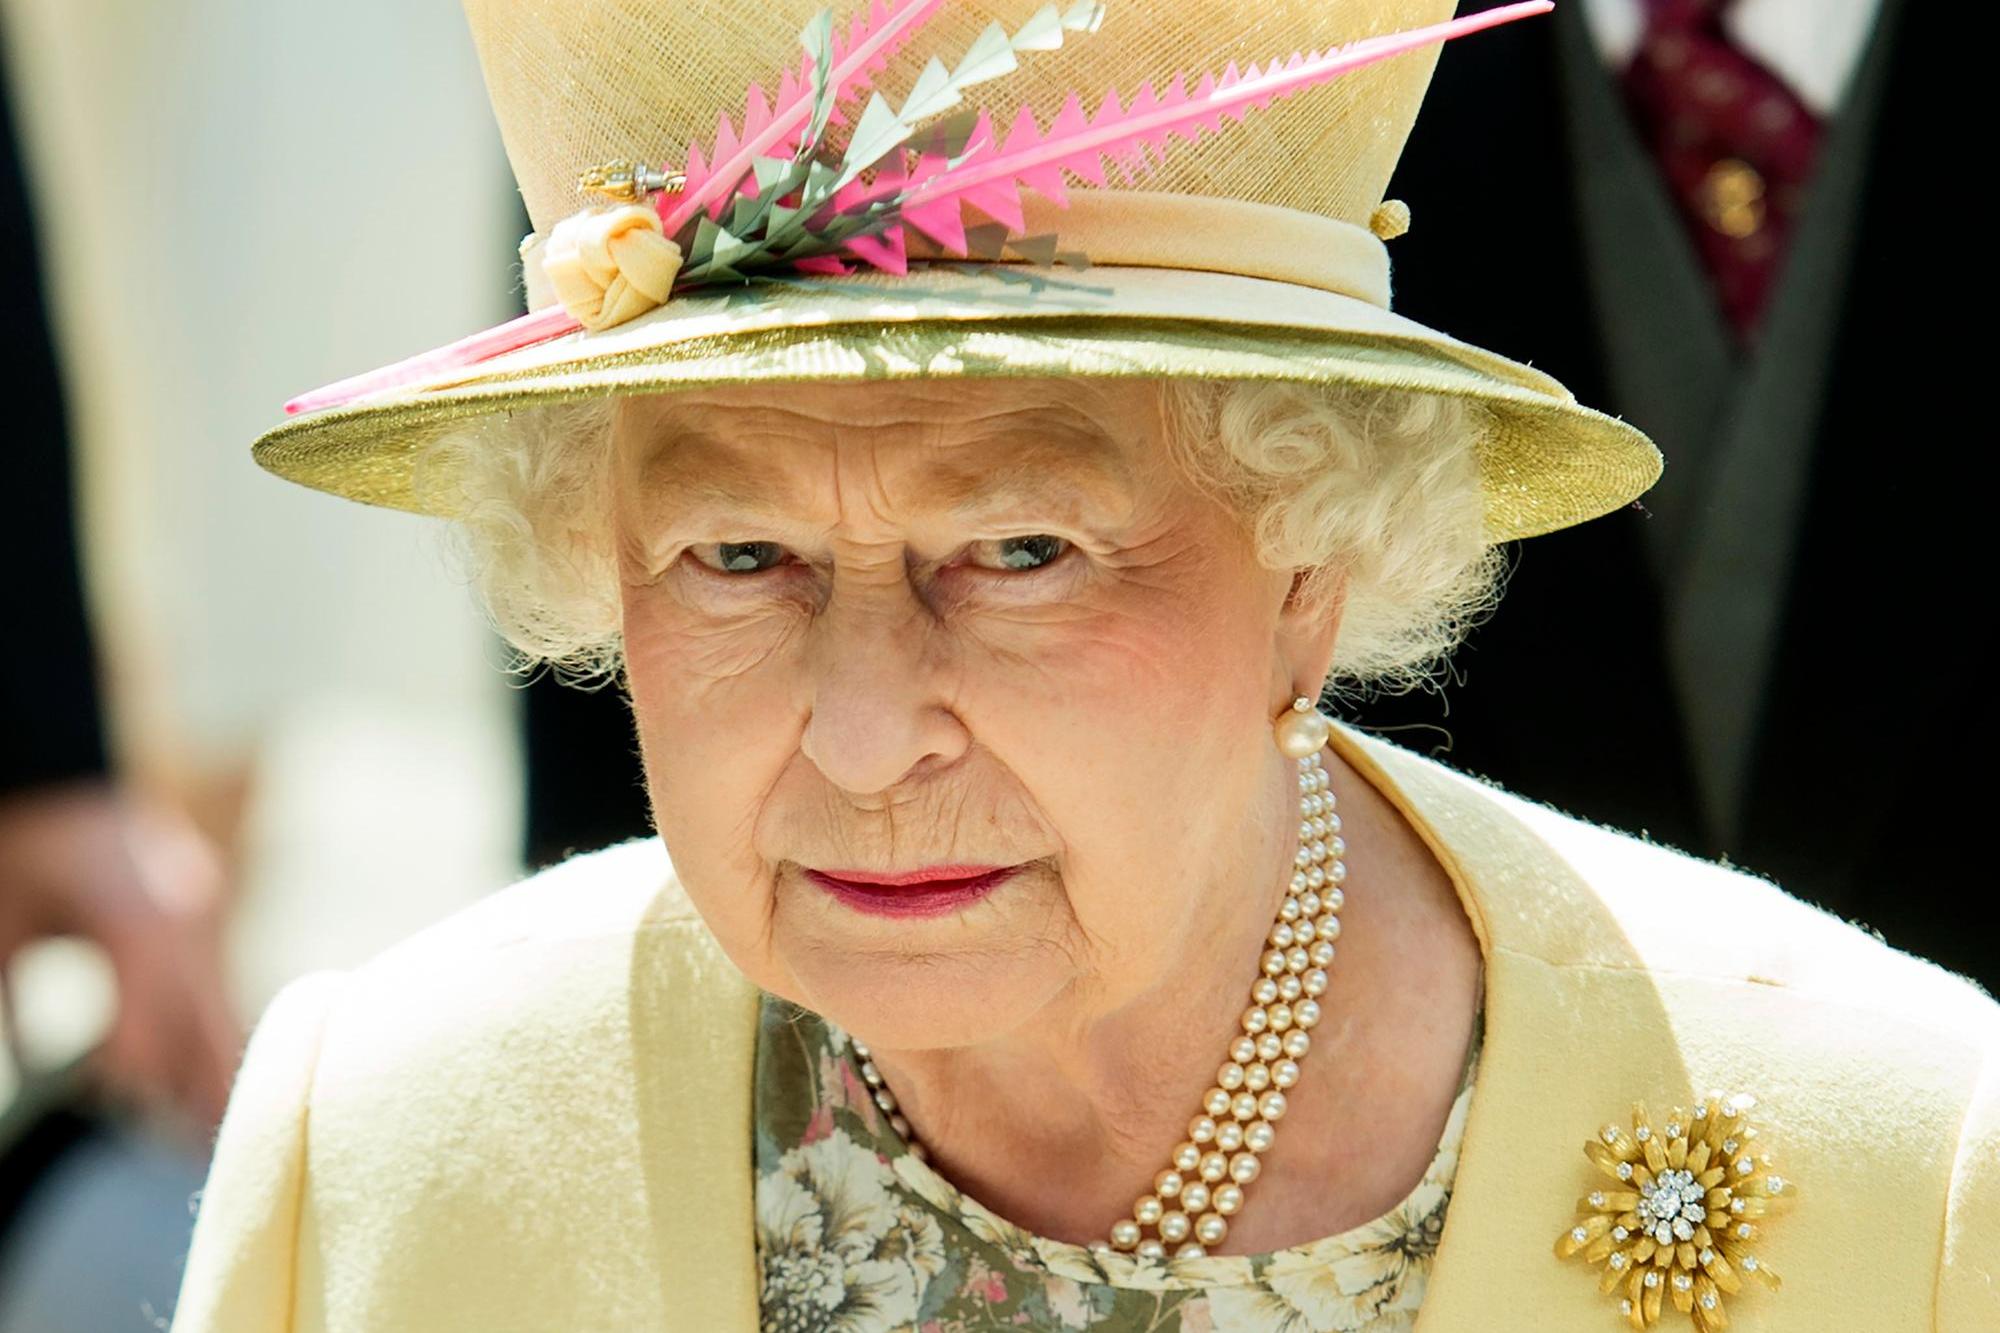 epa10170491 (FILE) - A picture dated 06 June 2015 shows Britain's Queen Elizabeth II arriving for the Derby Day at the Epsom Down Racecourse, in Epsom, outside London, Britain (reissued 08 September 2022). According to a statement issued by Buckingham Palace on 08 September 2022, Britain's Queen Elizabeth II has died at her Scottish estate, Balmoral Castle, on 08 September 2022. The 96-year-old Queen was the longest-reigning monarch in British history. EPA/FACUNDO ARRIZABALAGA